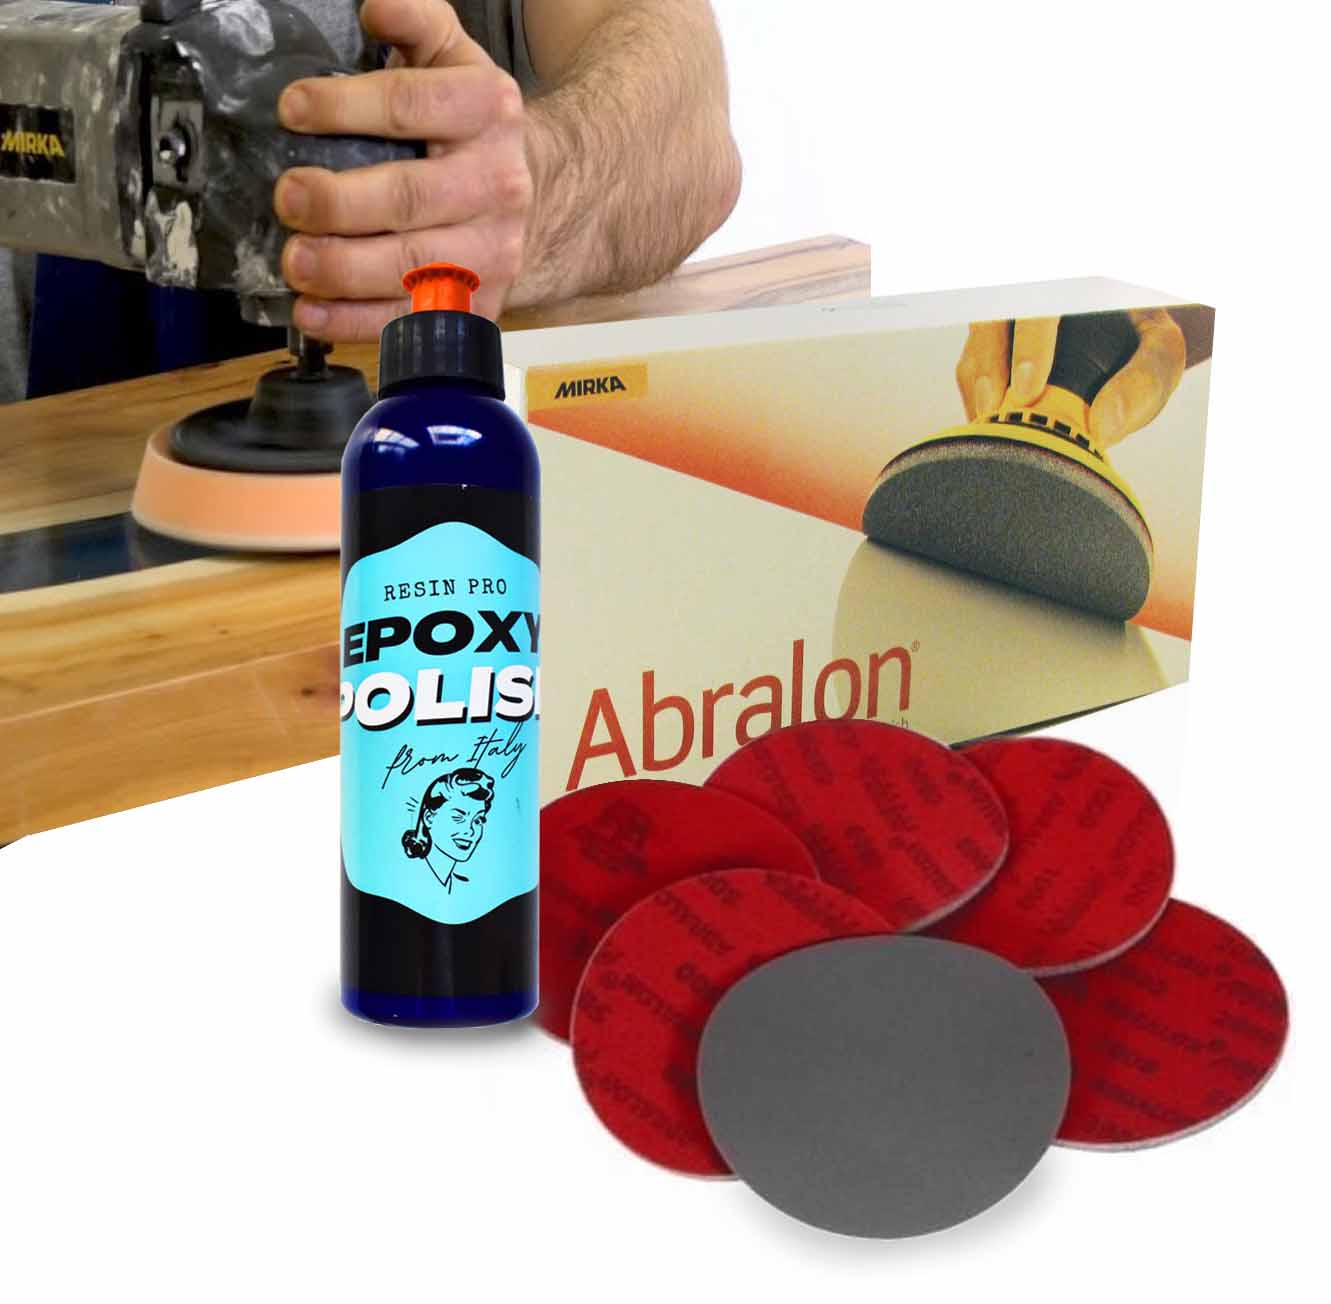 Medium Resin Sanding and Polishing Starter Kit With MICRO ABRASION, Sand  Paper up to 10 000 Grit 